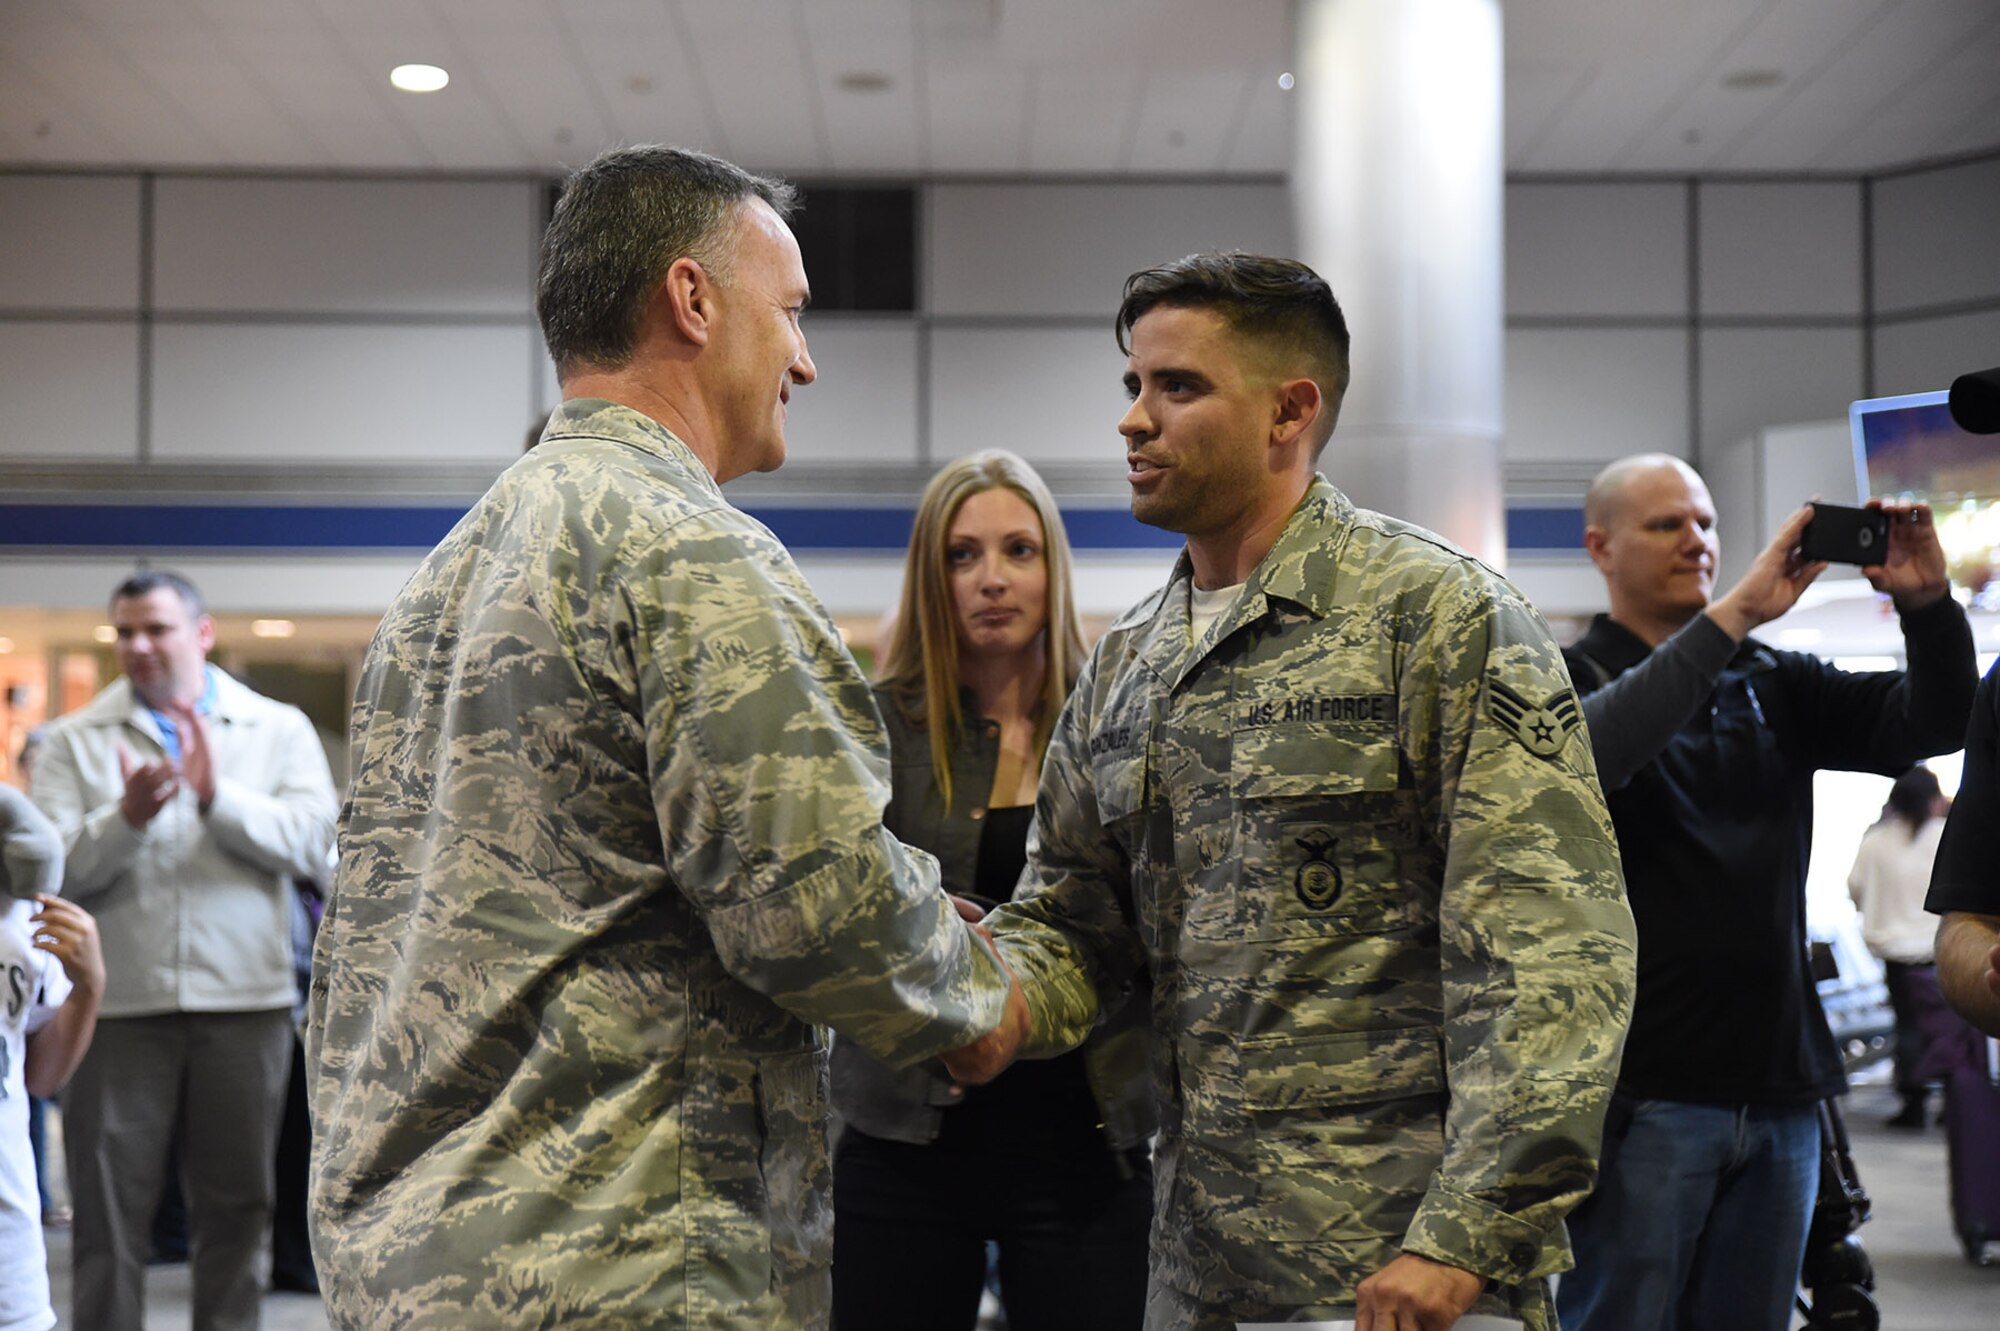 U.S. Air Force Senior Airman Christopher Gonzales, 144th Security Forces Squadron, is welcomed home and promoted to Staff Sgt. by Lt. Col. Dave Johnston, 144th Security Forces Squadron commander, at the Fresno Yosemite International Airport Jan. 21, 2015. Senior Airman Gonzales was deployed for more than seven months in support of Operation Enduring Freedom. (U.S. Air National Guard photo by Senior Master Sgt. Chris Drudge)